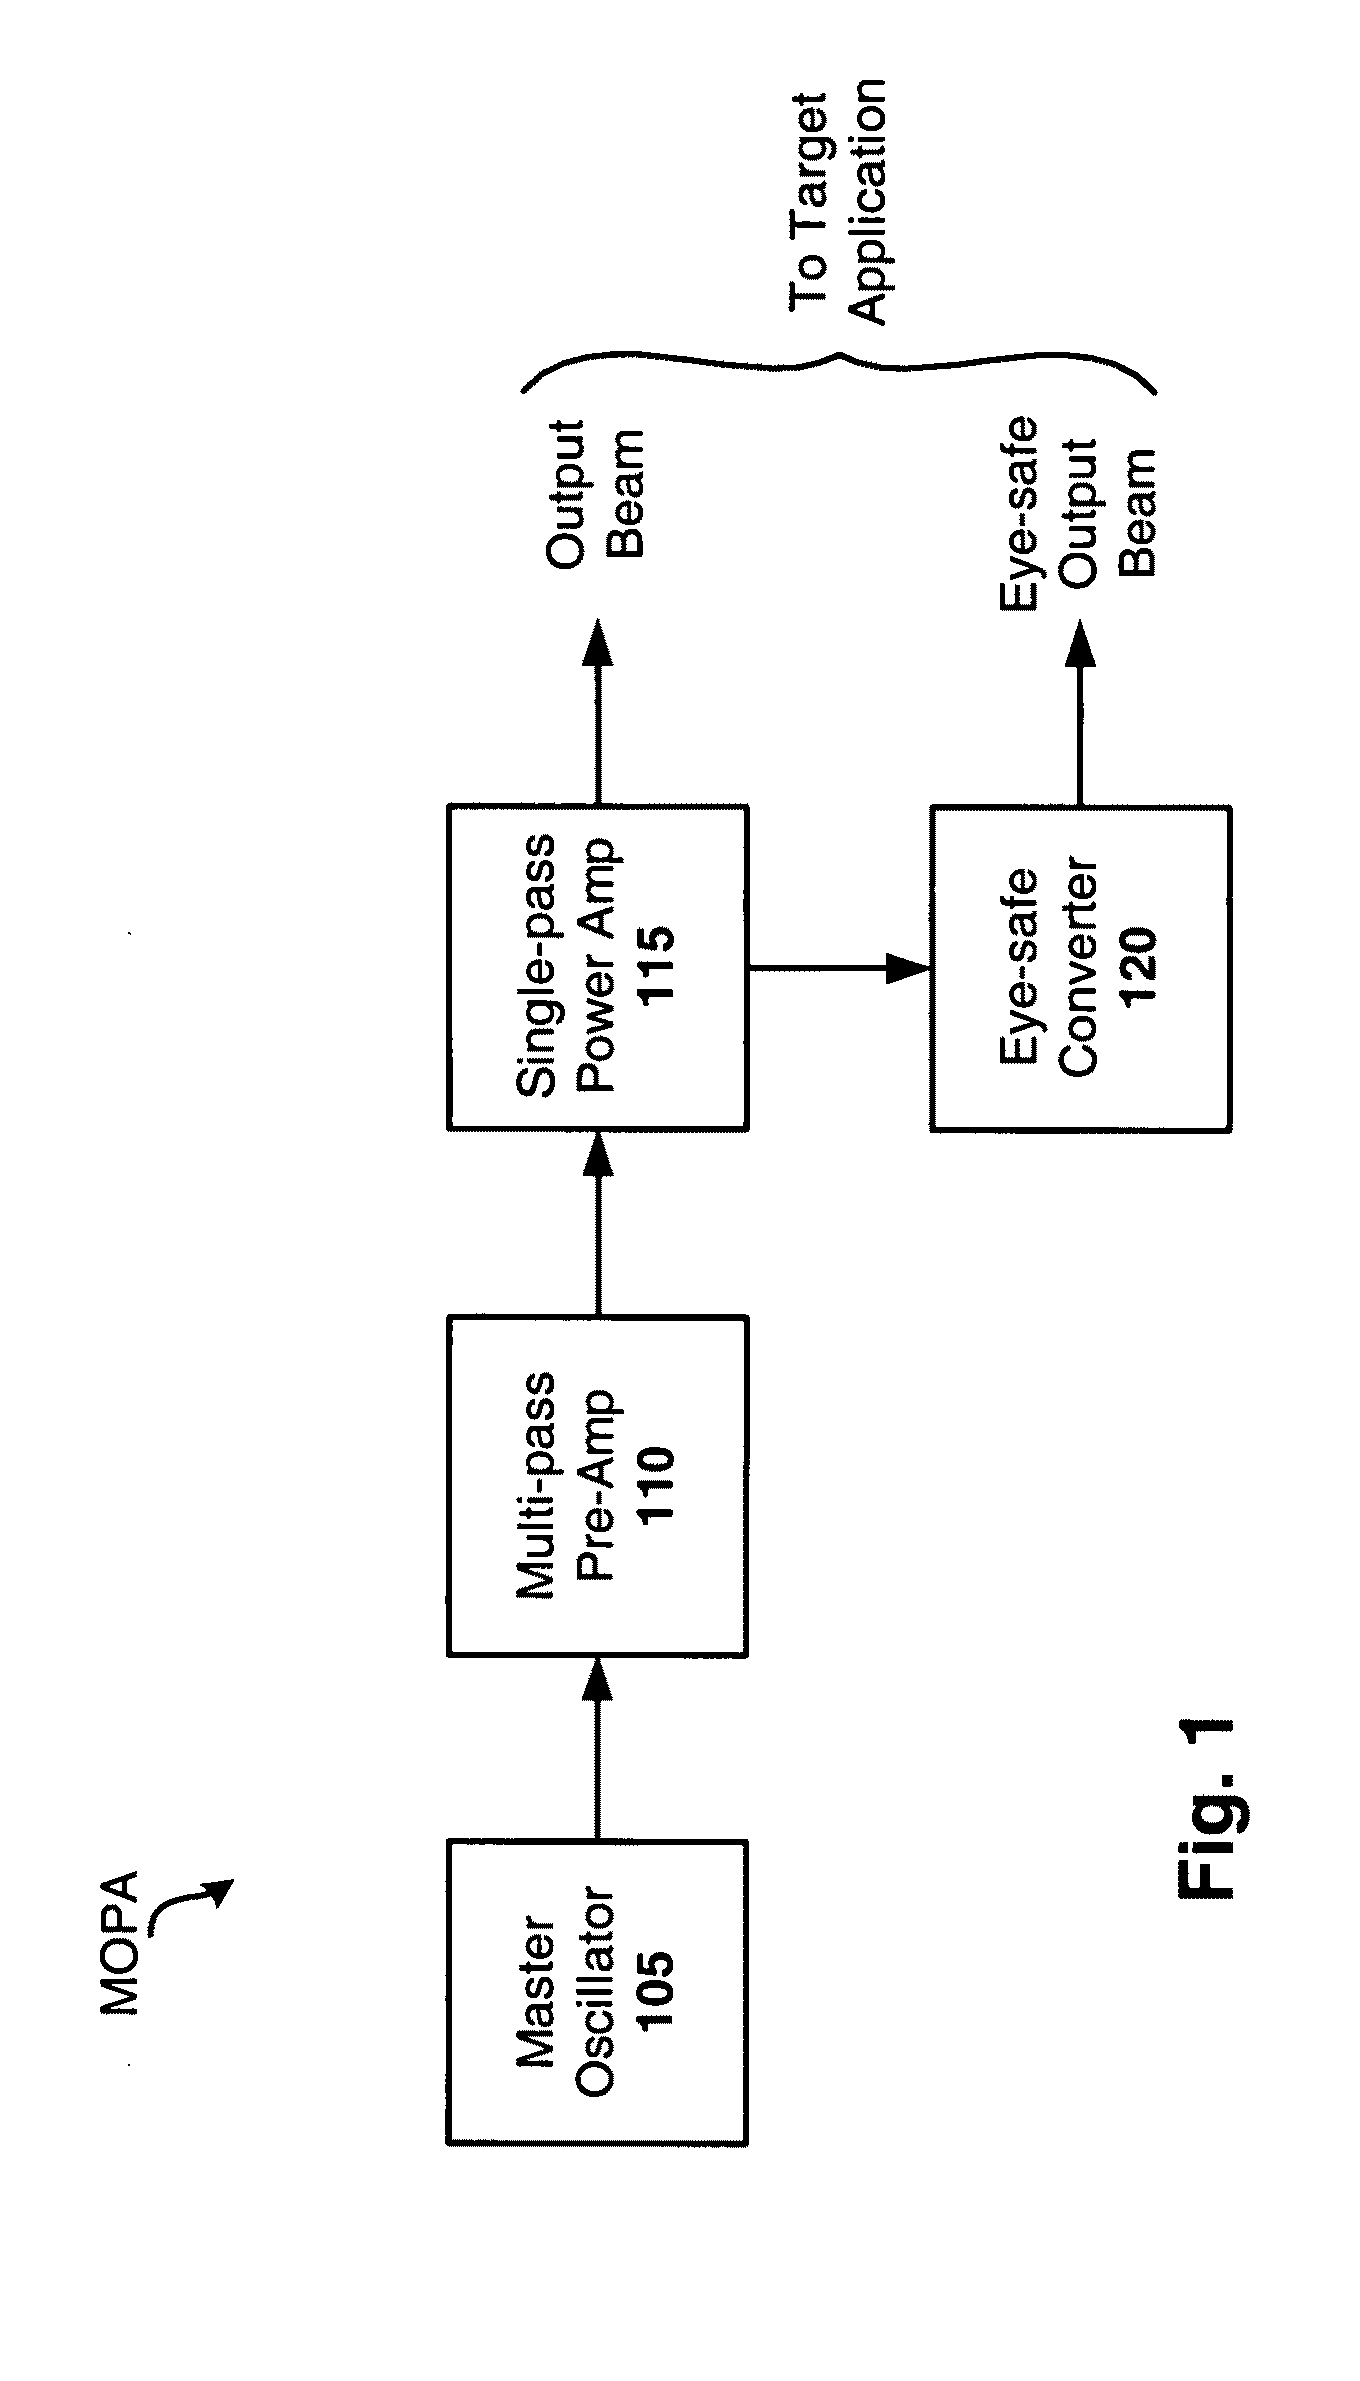 Multi-pass laser amplifier with staged gain mediums of varied absorption length